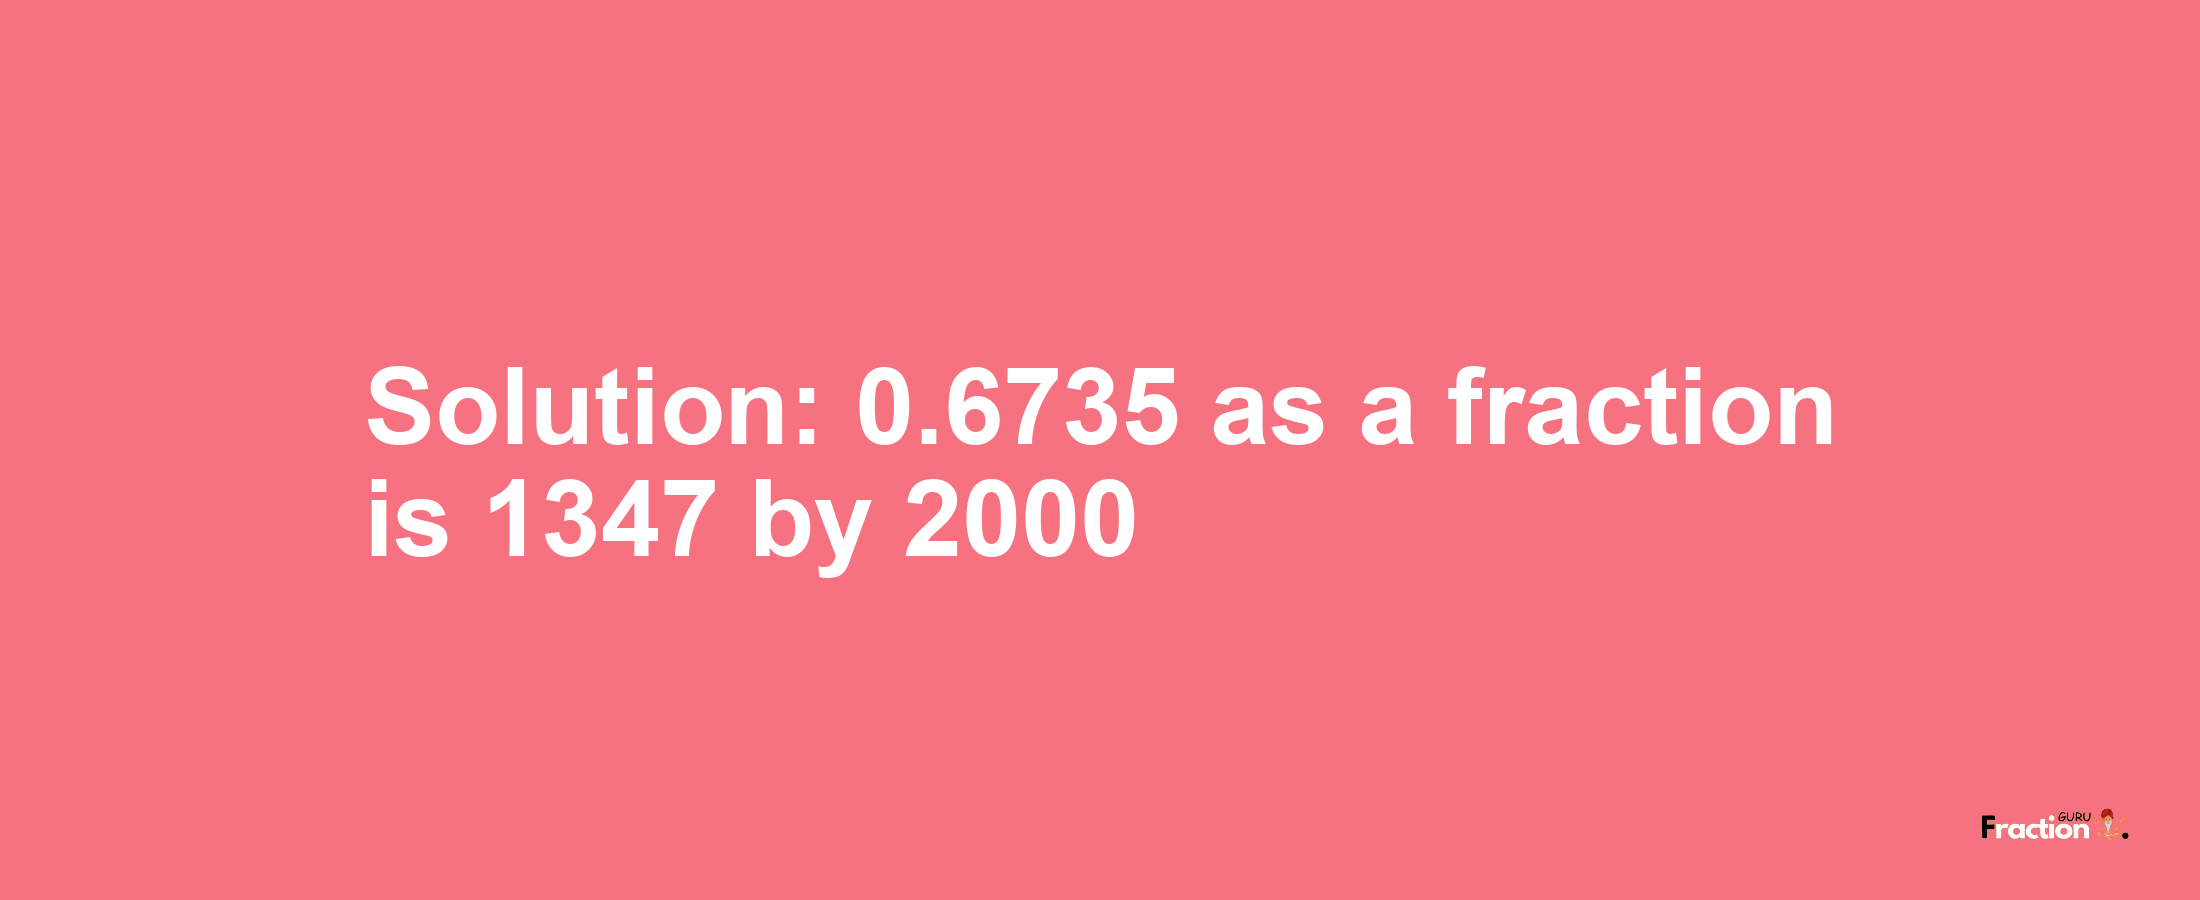 Solution:0.6735 as a fraction is 1347/2000